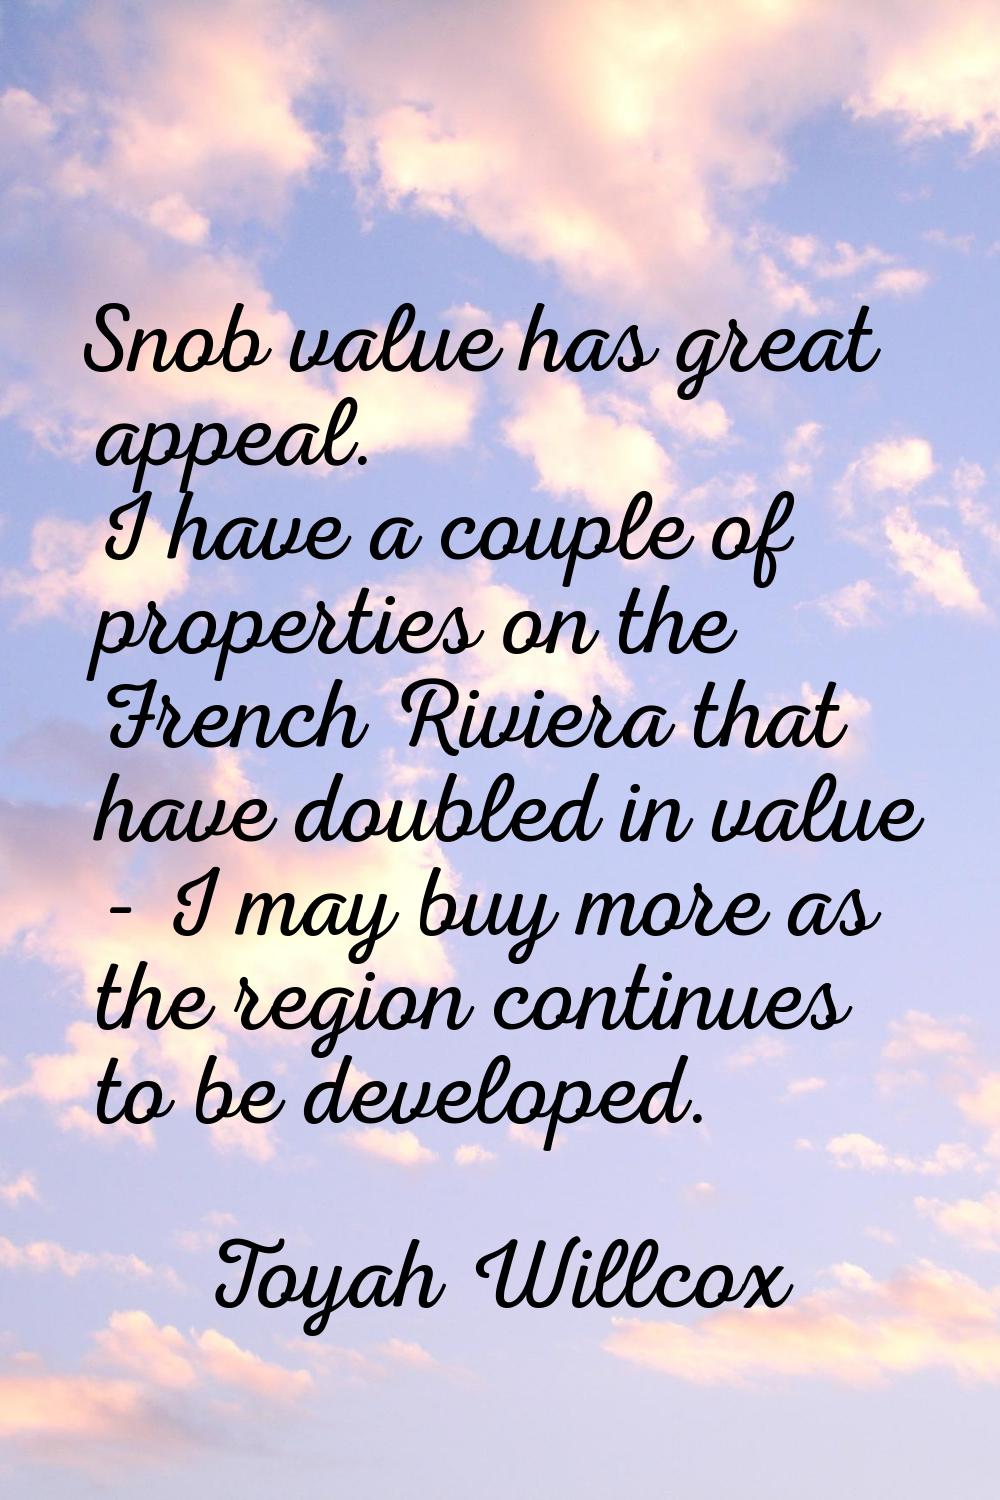 Snob value has great appeal. I have a couple of properties on the French Riviera that have doubled 